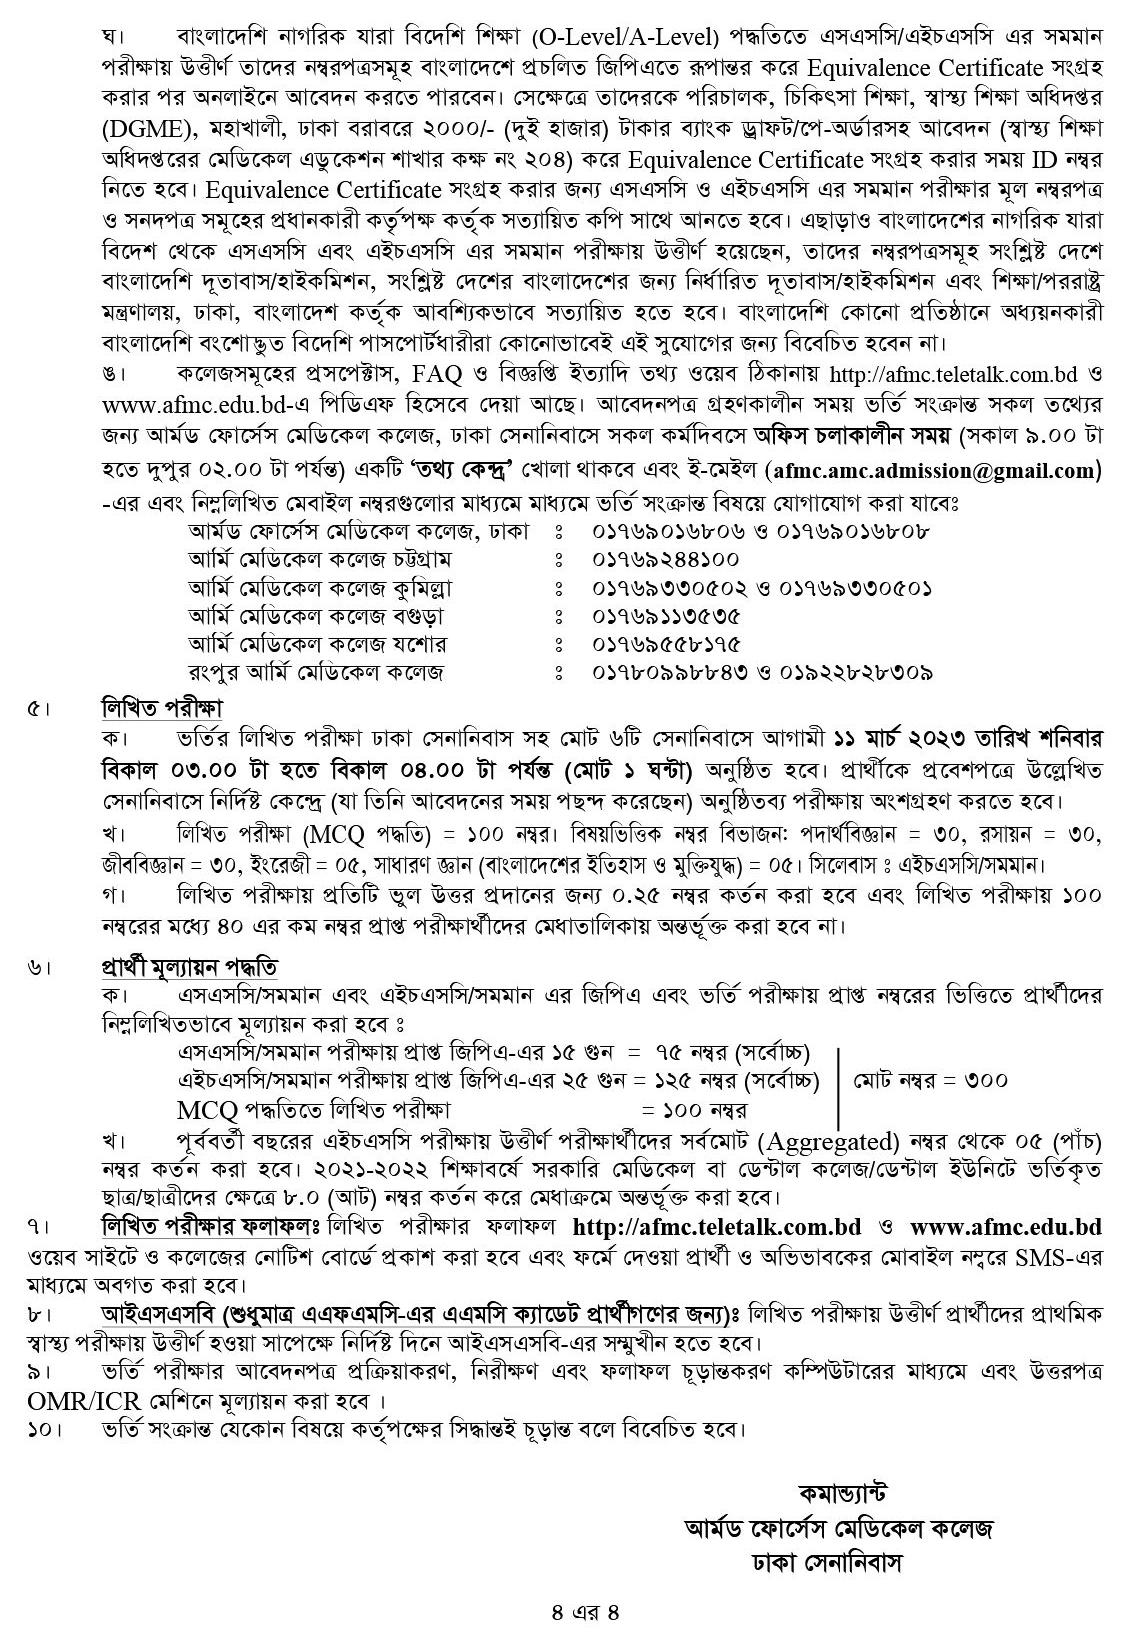 Armed Forces Medical College Admission Circular 2022-23 2